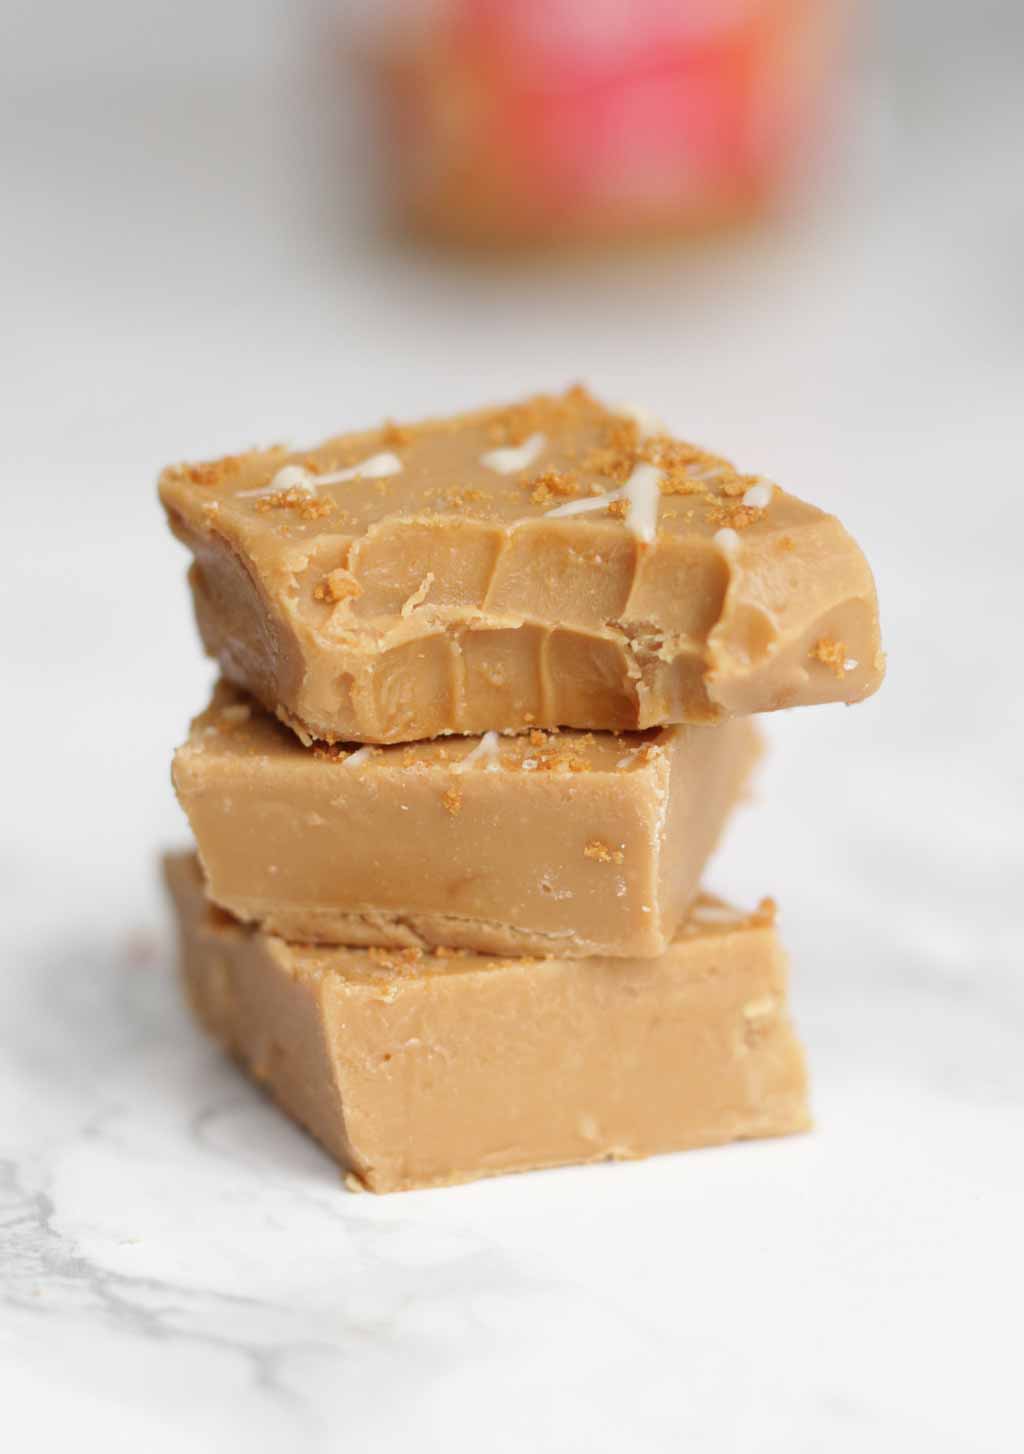 3 Pieces Of Fudge Stacked On Top Of One Another. The Top Piece Has A Bite Taken Out Of It